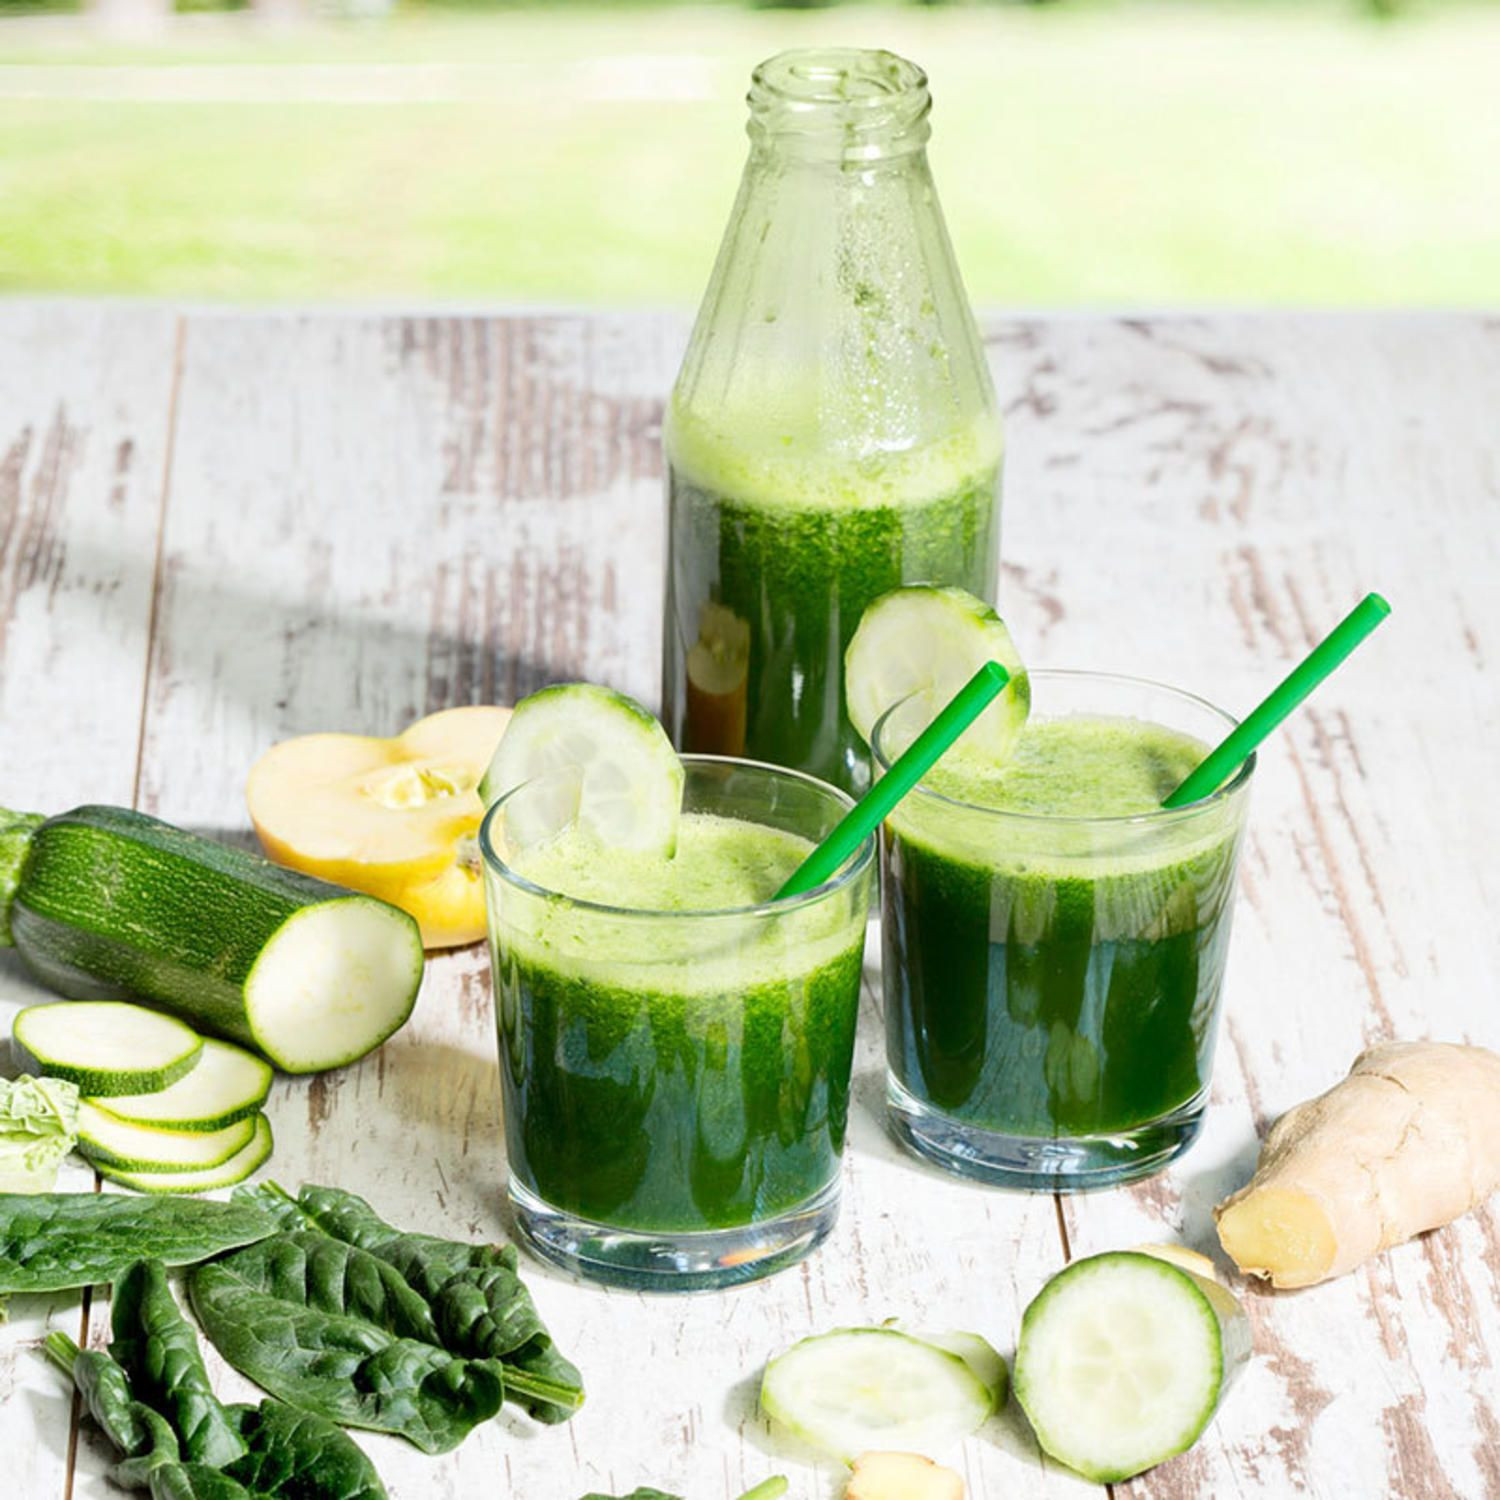 Coconut Water Smoothie Recipes
 This Cucumber Coconut Water Smoothie Just Might Be the